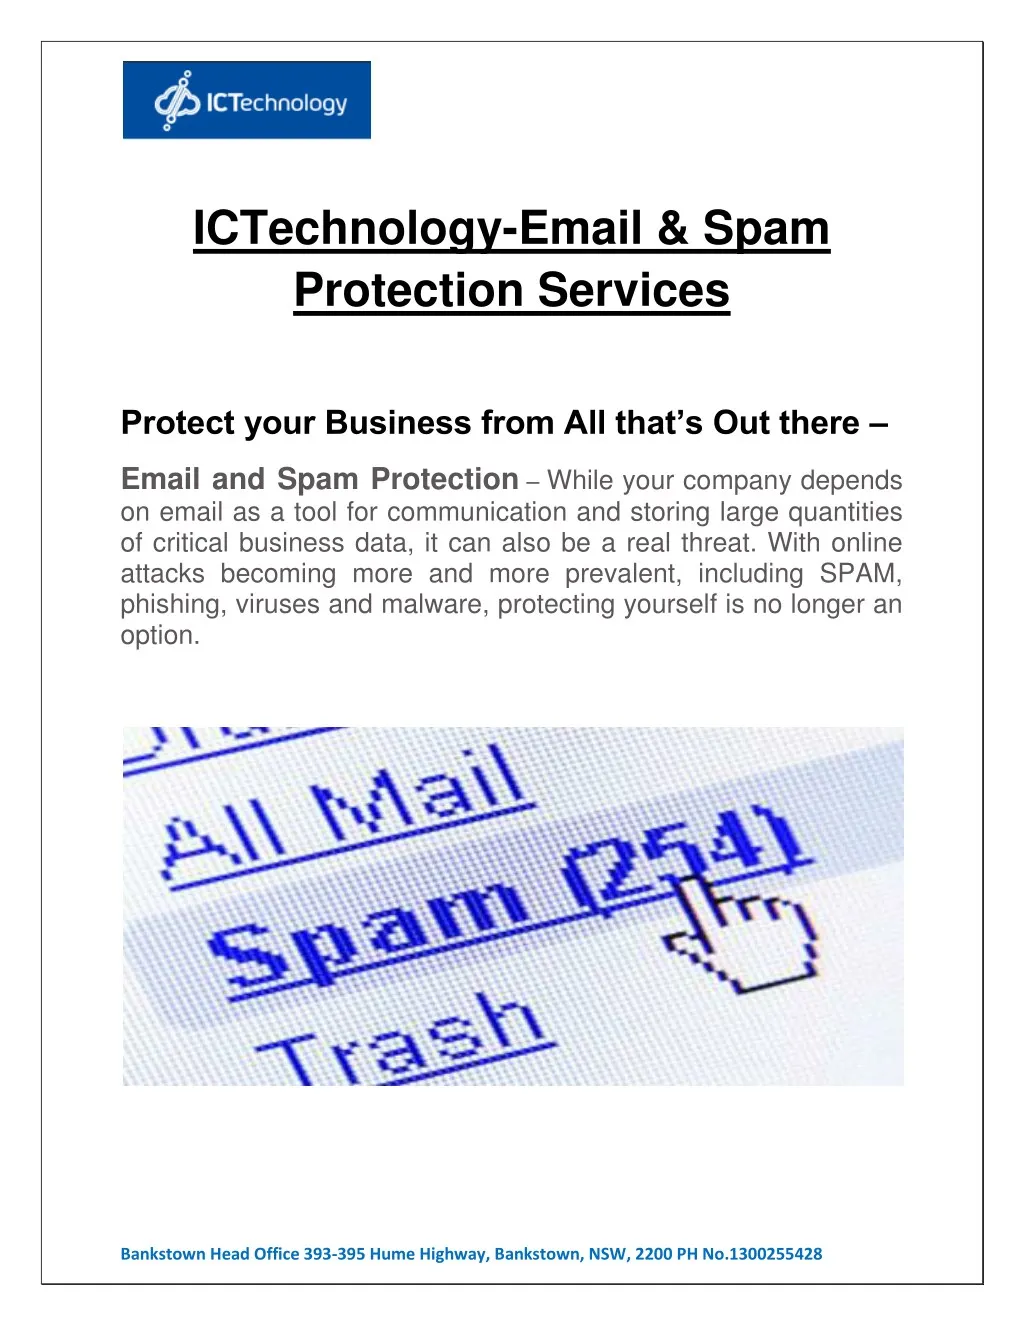 ictechnology email spam protection services